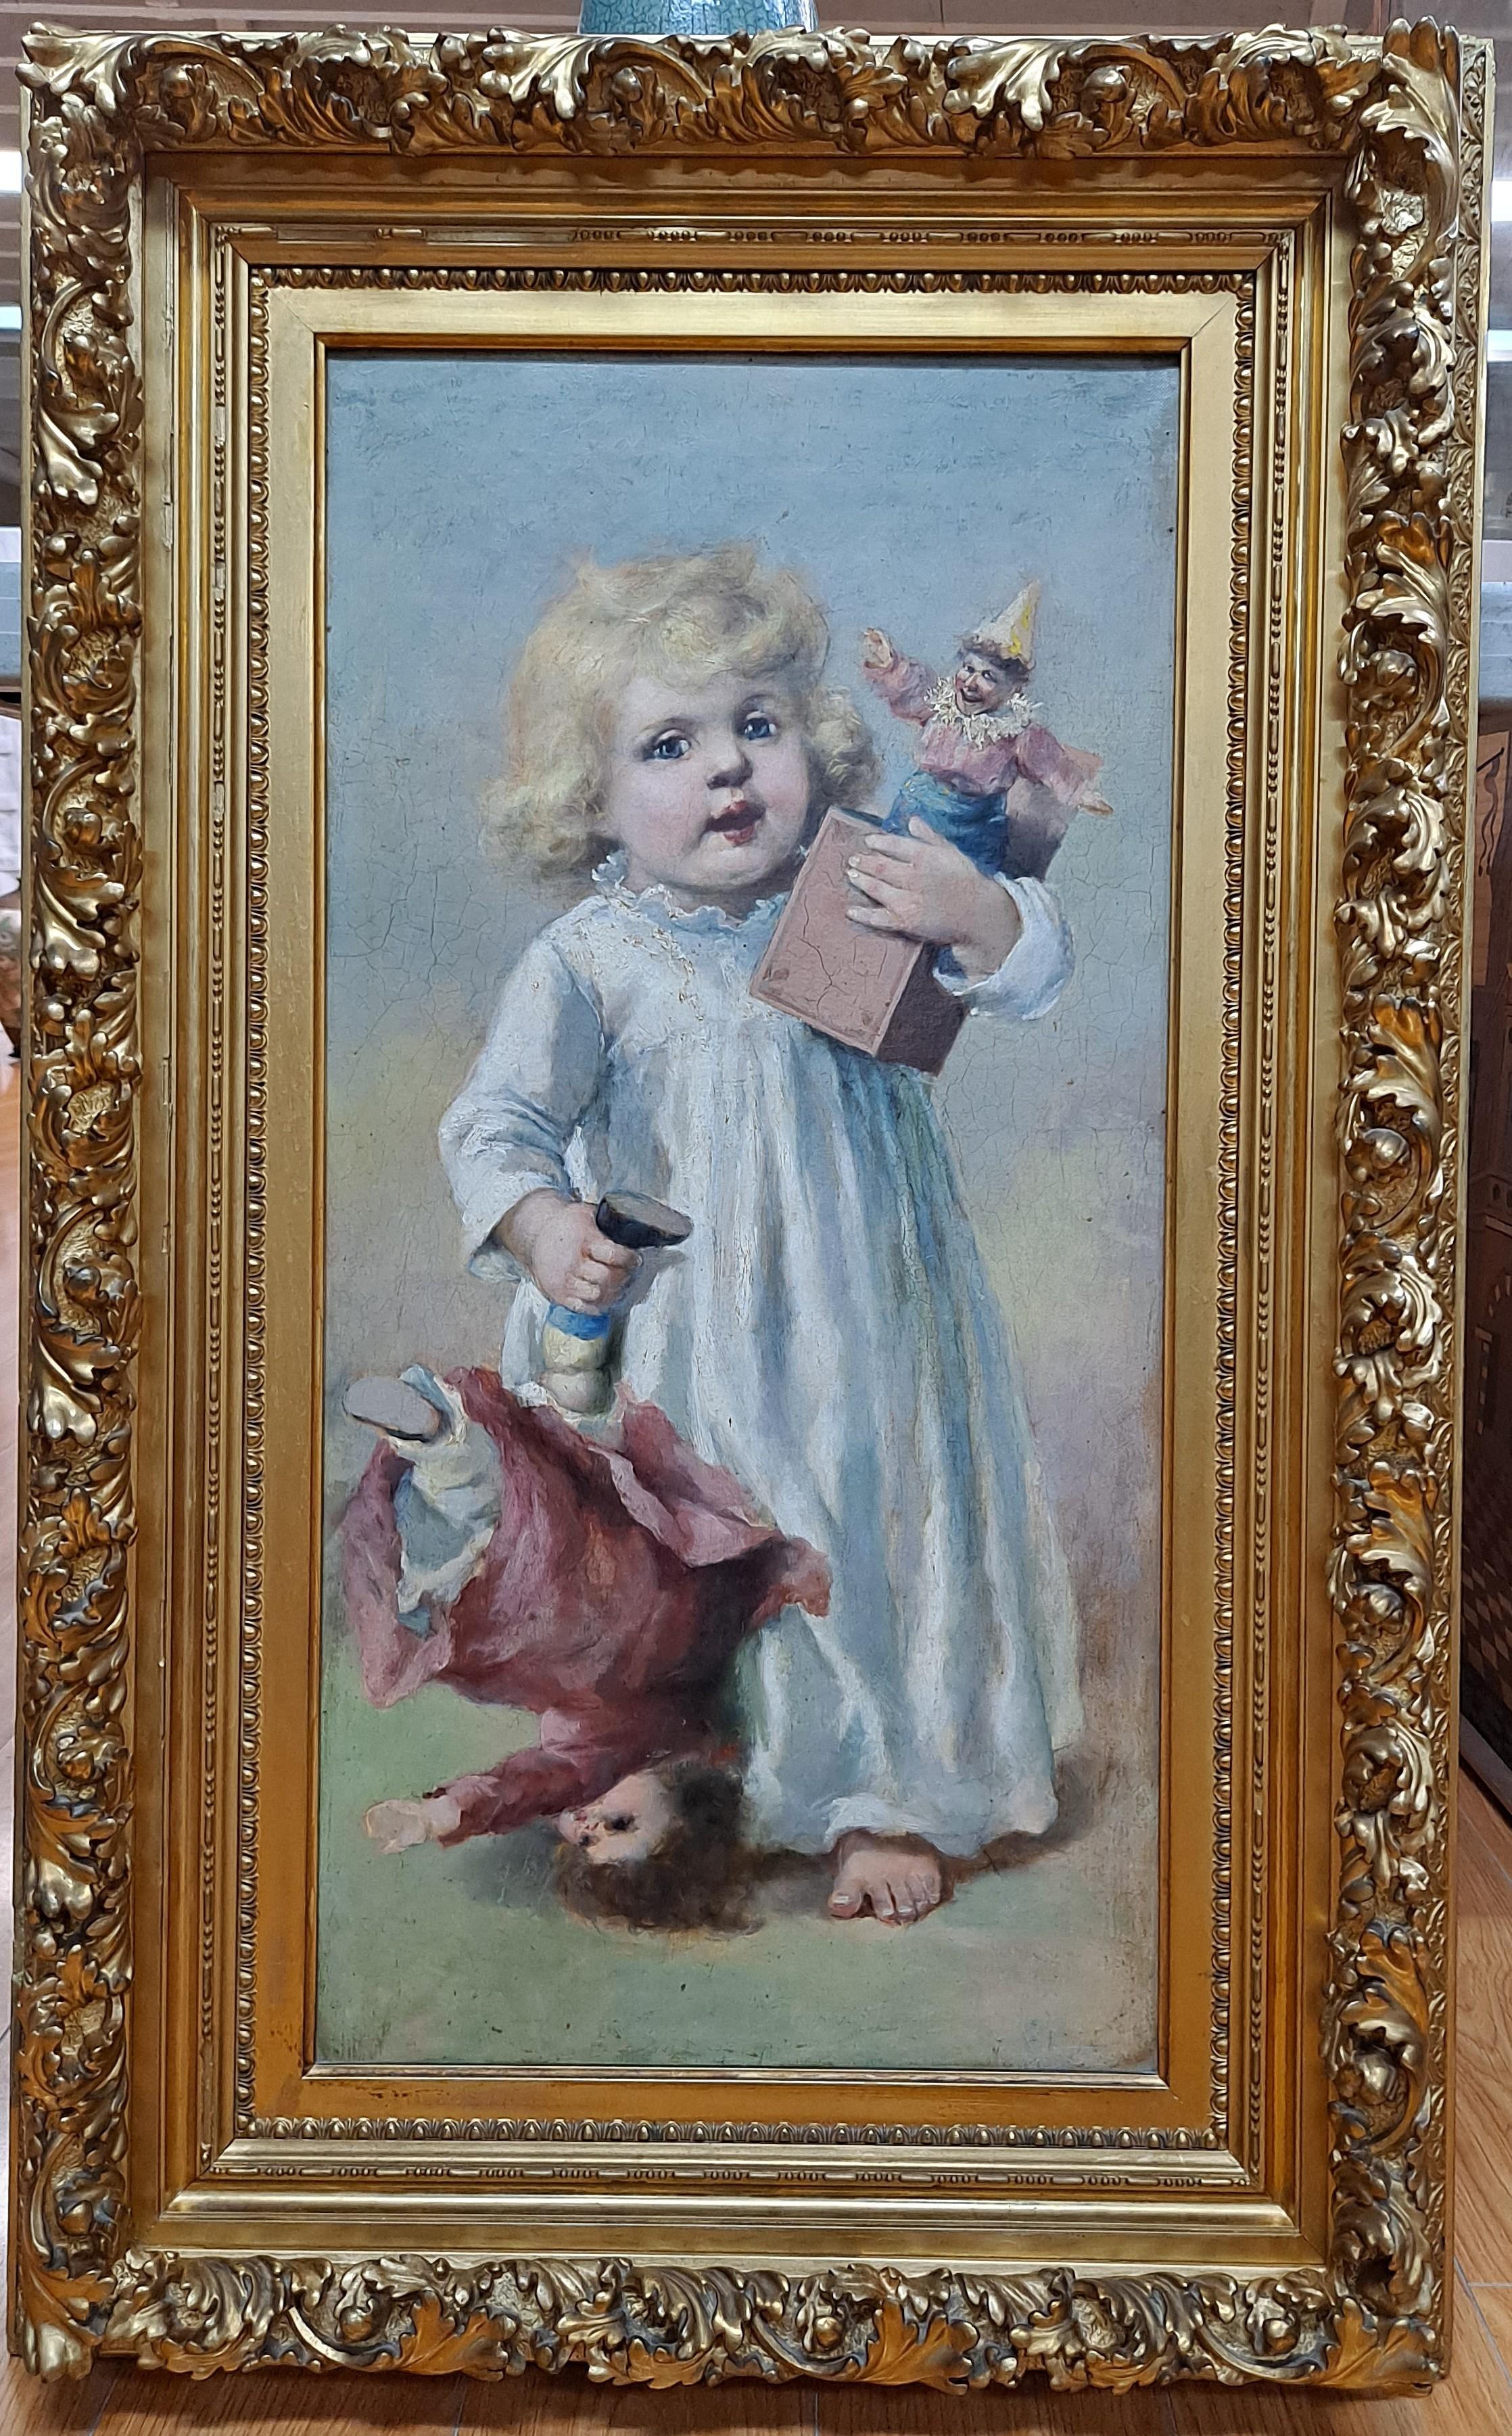 19th century Portrait painting of young girl with doll and pop-up toy

Beautiful carved in gilded frame

Oil on canvas

14 x 28 unframed

23.5 x 37.5 framed